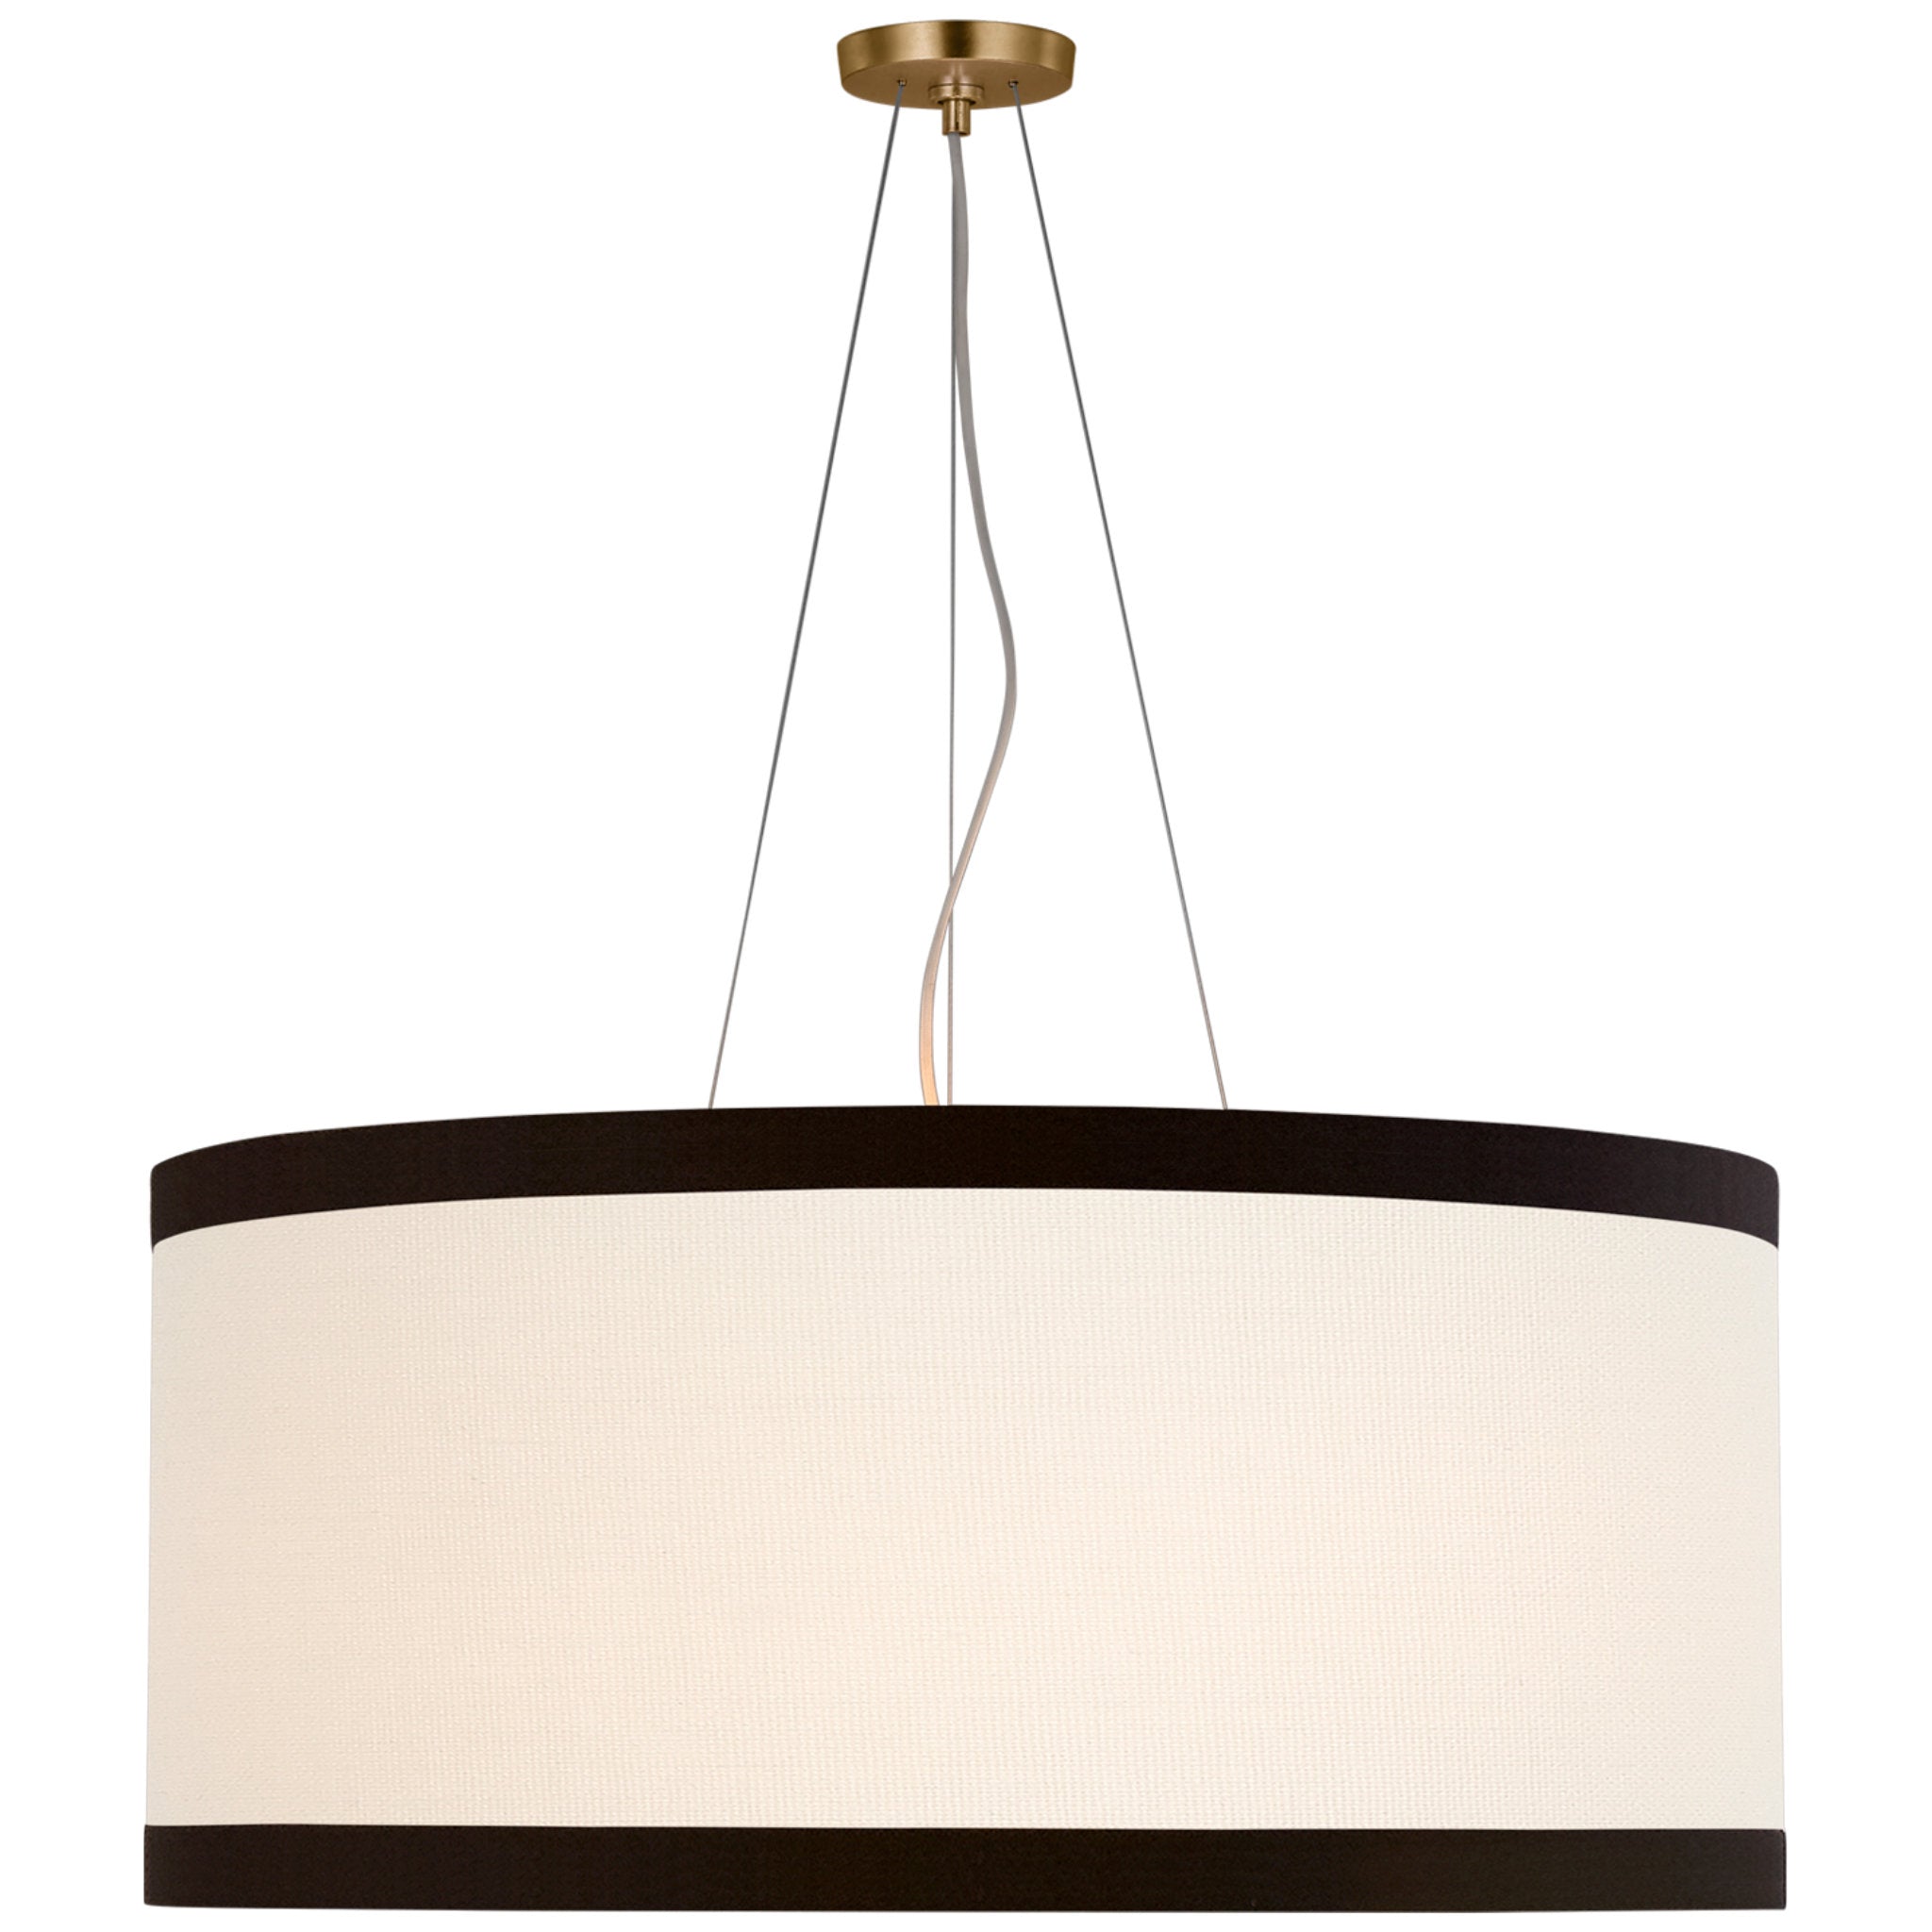 kate spade new york Walker Large Hanging Shade in Gild with Cream Linen Shade with Black Linen Trim